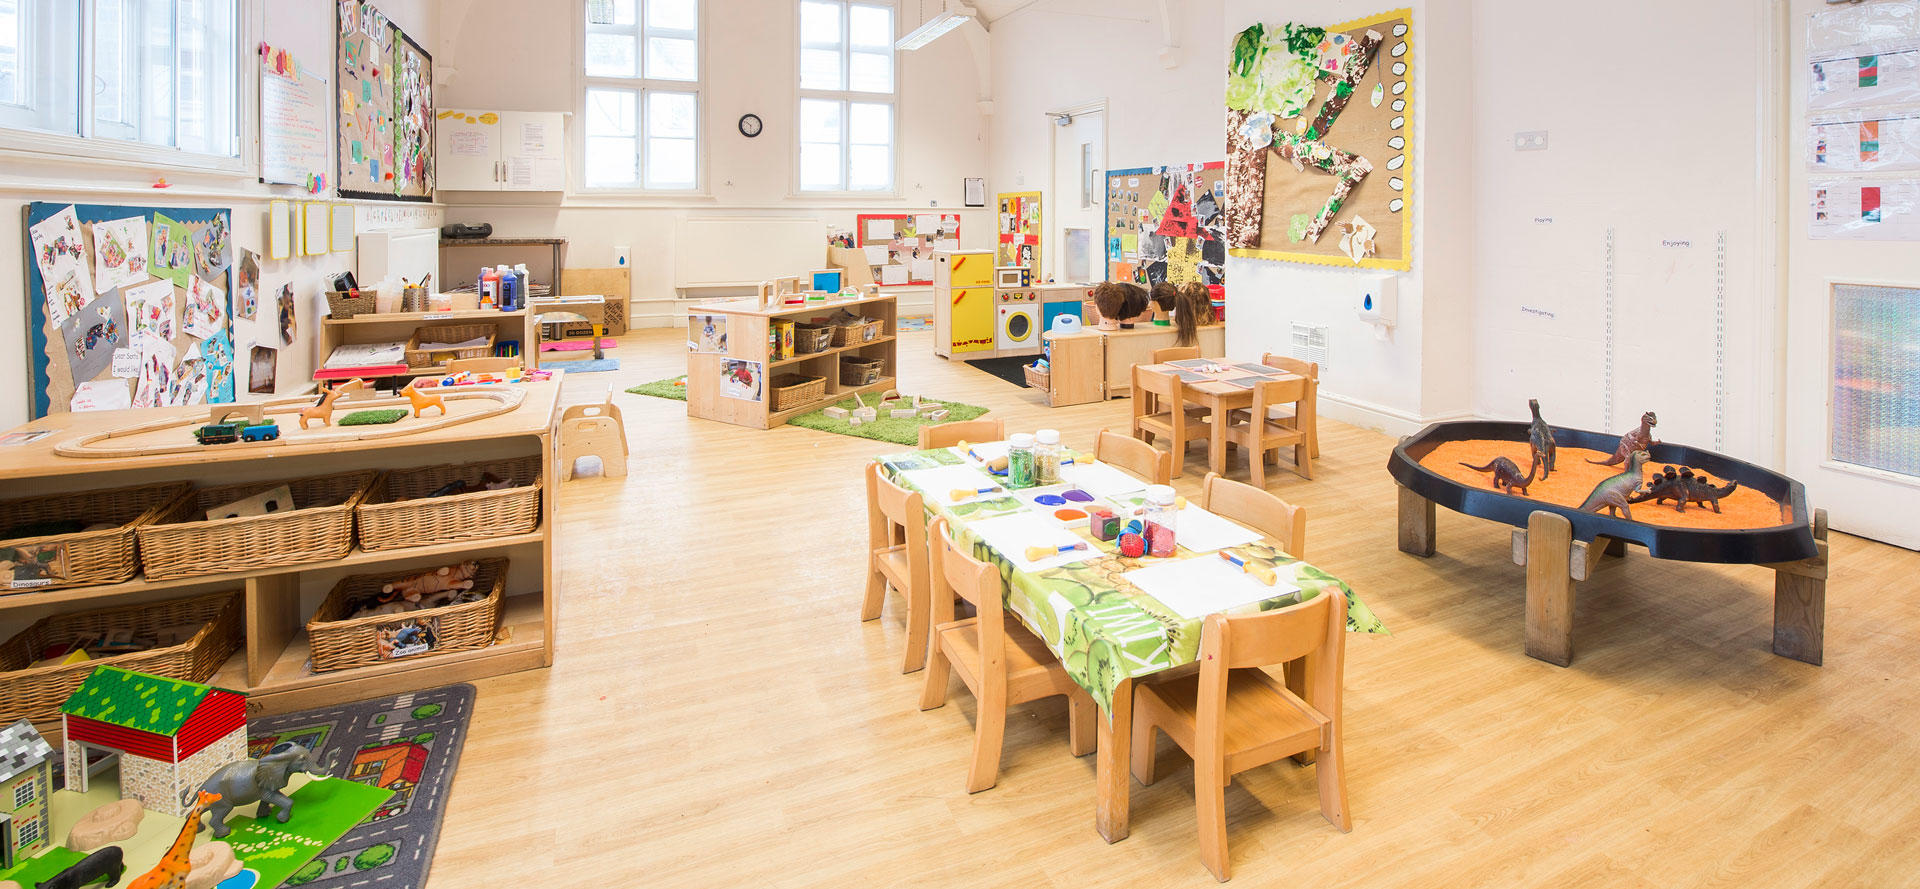 Bright Horizons Coulsdon Day Nursery and Preschool Coulsdon 03300 572290